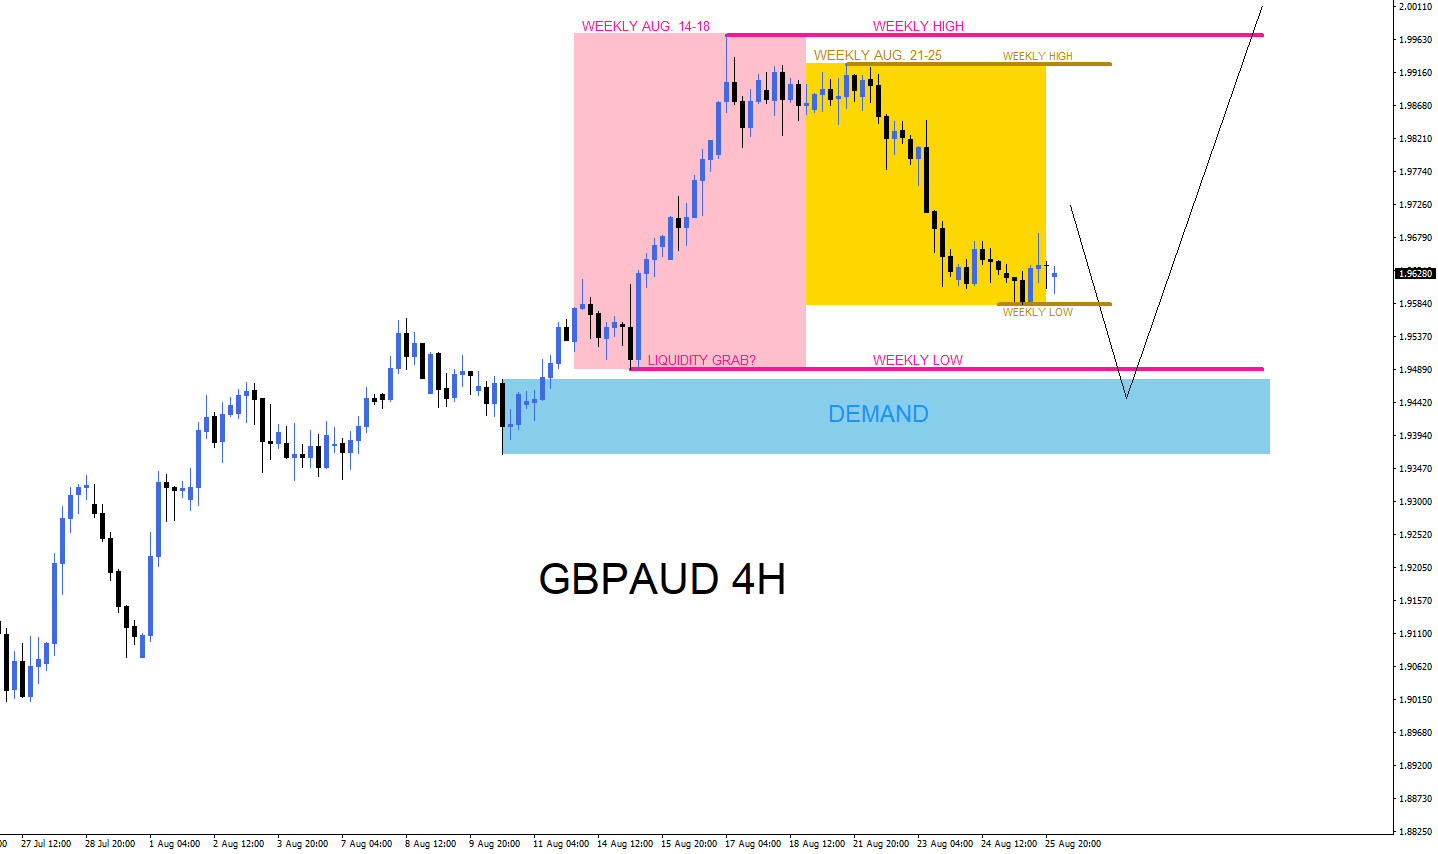 GBPAUD : Watch for Buying Opportunities